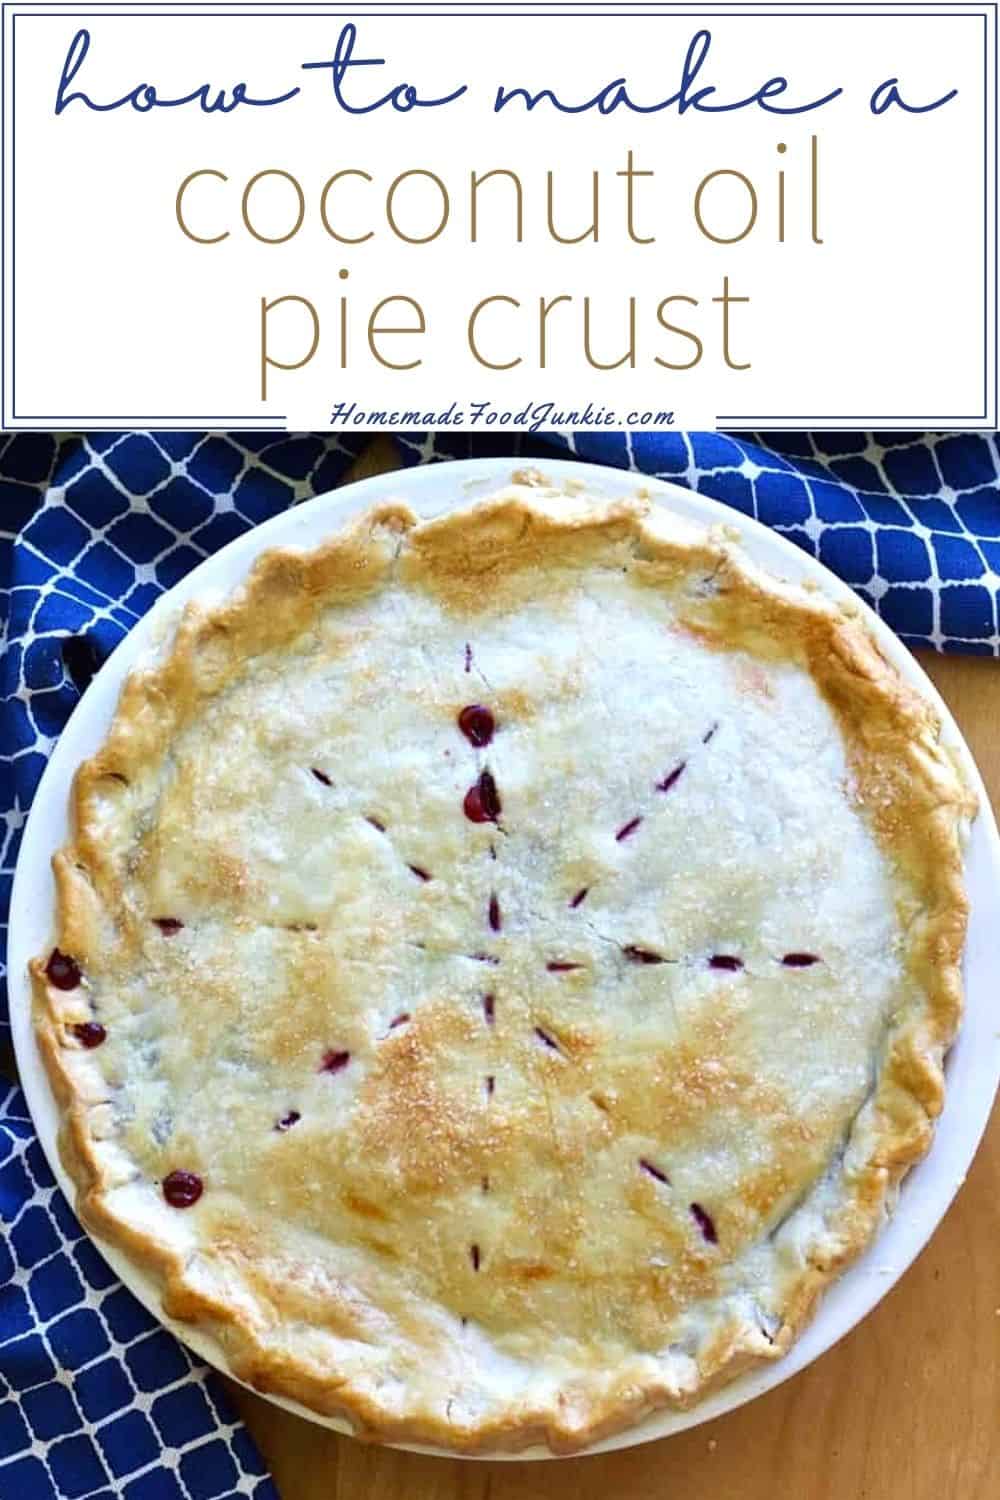 How To Make A Coconut Oil Pie Crust-Pin Image